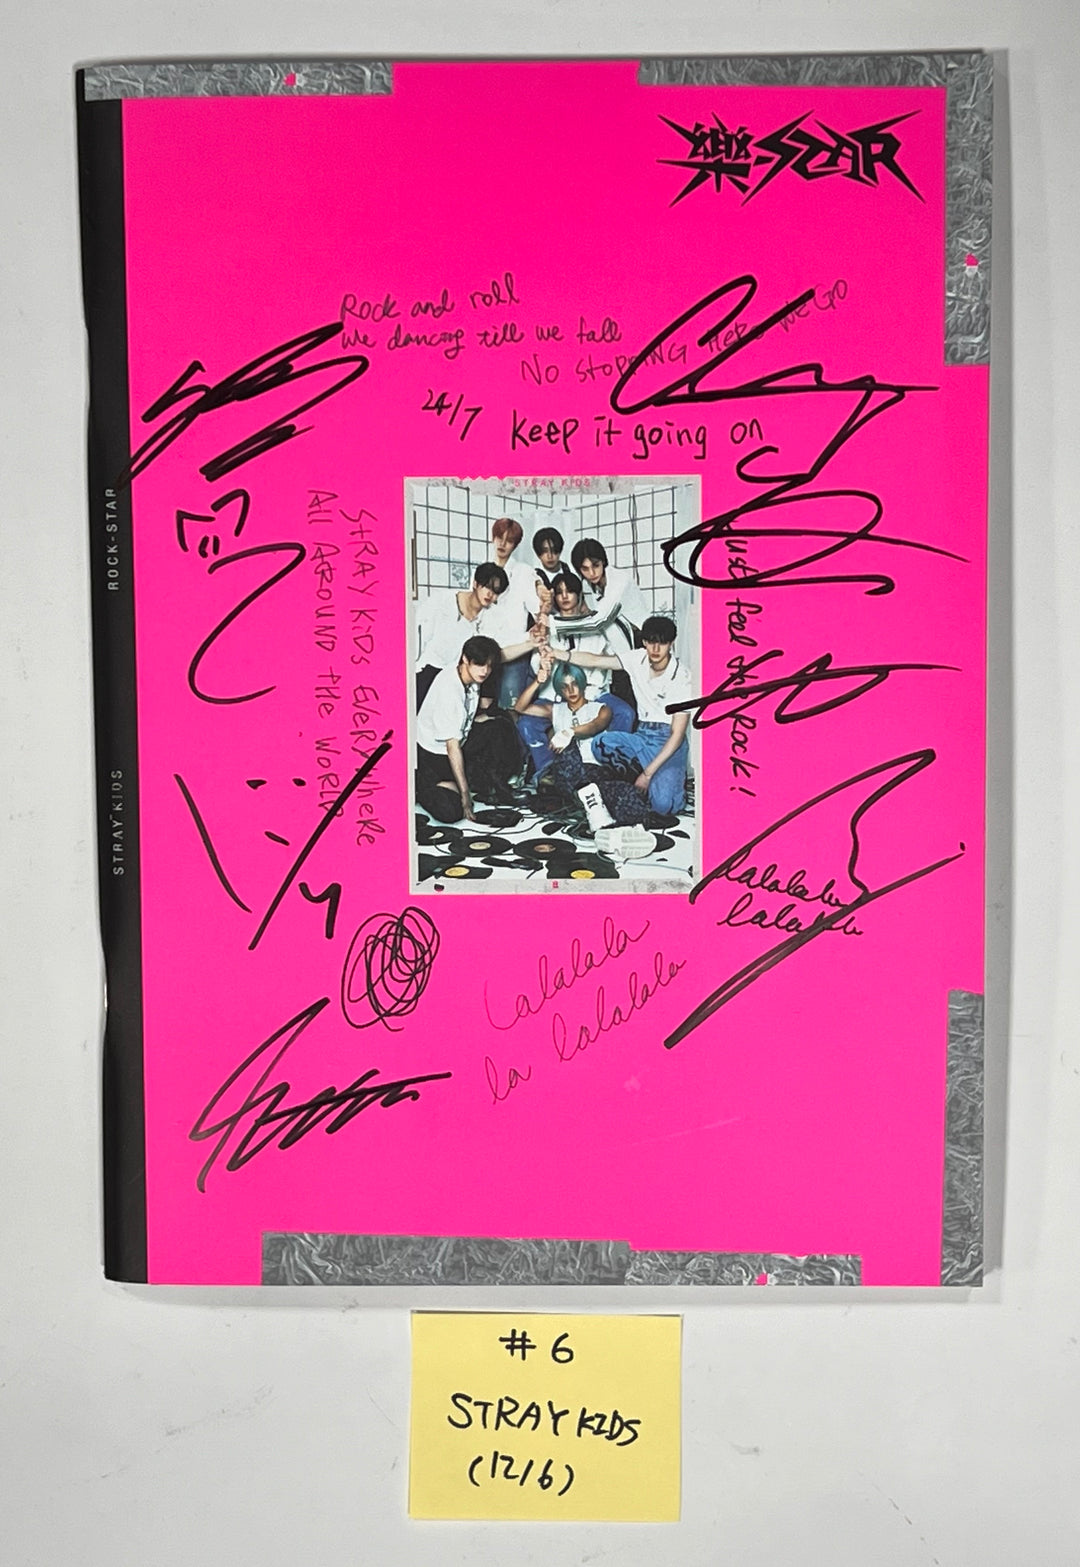 Stray Kids "樂-Star", ZEROBASEONE (ZB1) "MELTING POINT" - Hand Autographed(Signed) Promo Photocard [23.12.06]